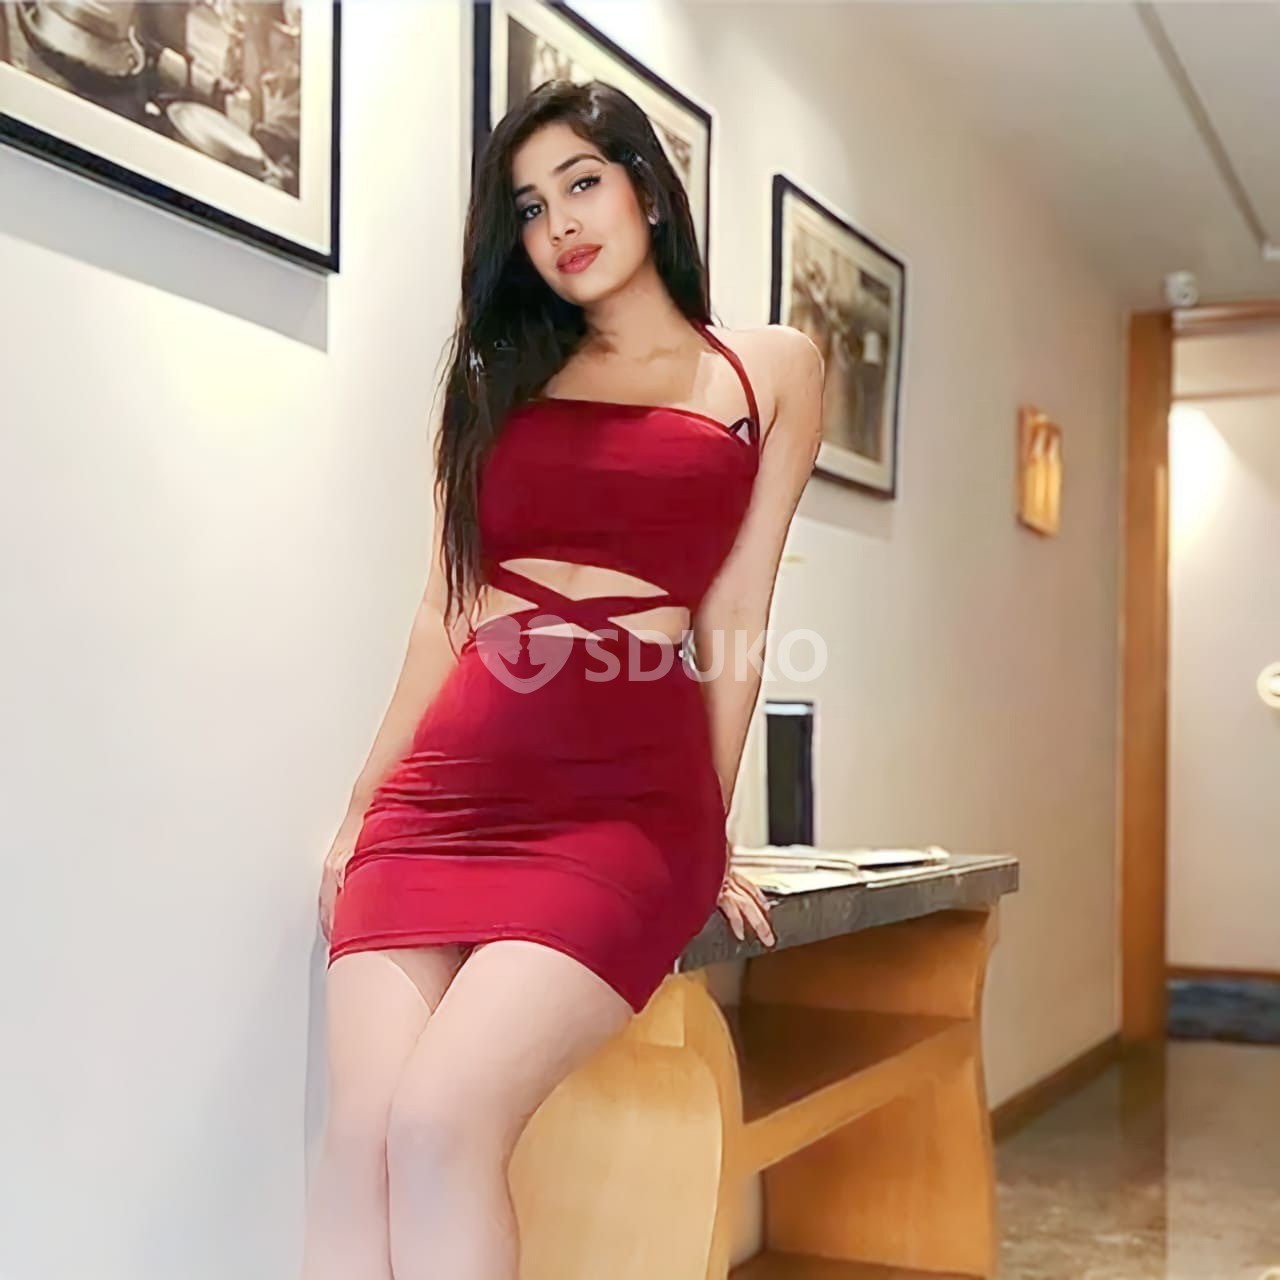 Kolkata 🆑 BEST CALL GIRL INDEPENDENT ESCORT SERVICE IN LOW BUDGET